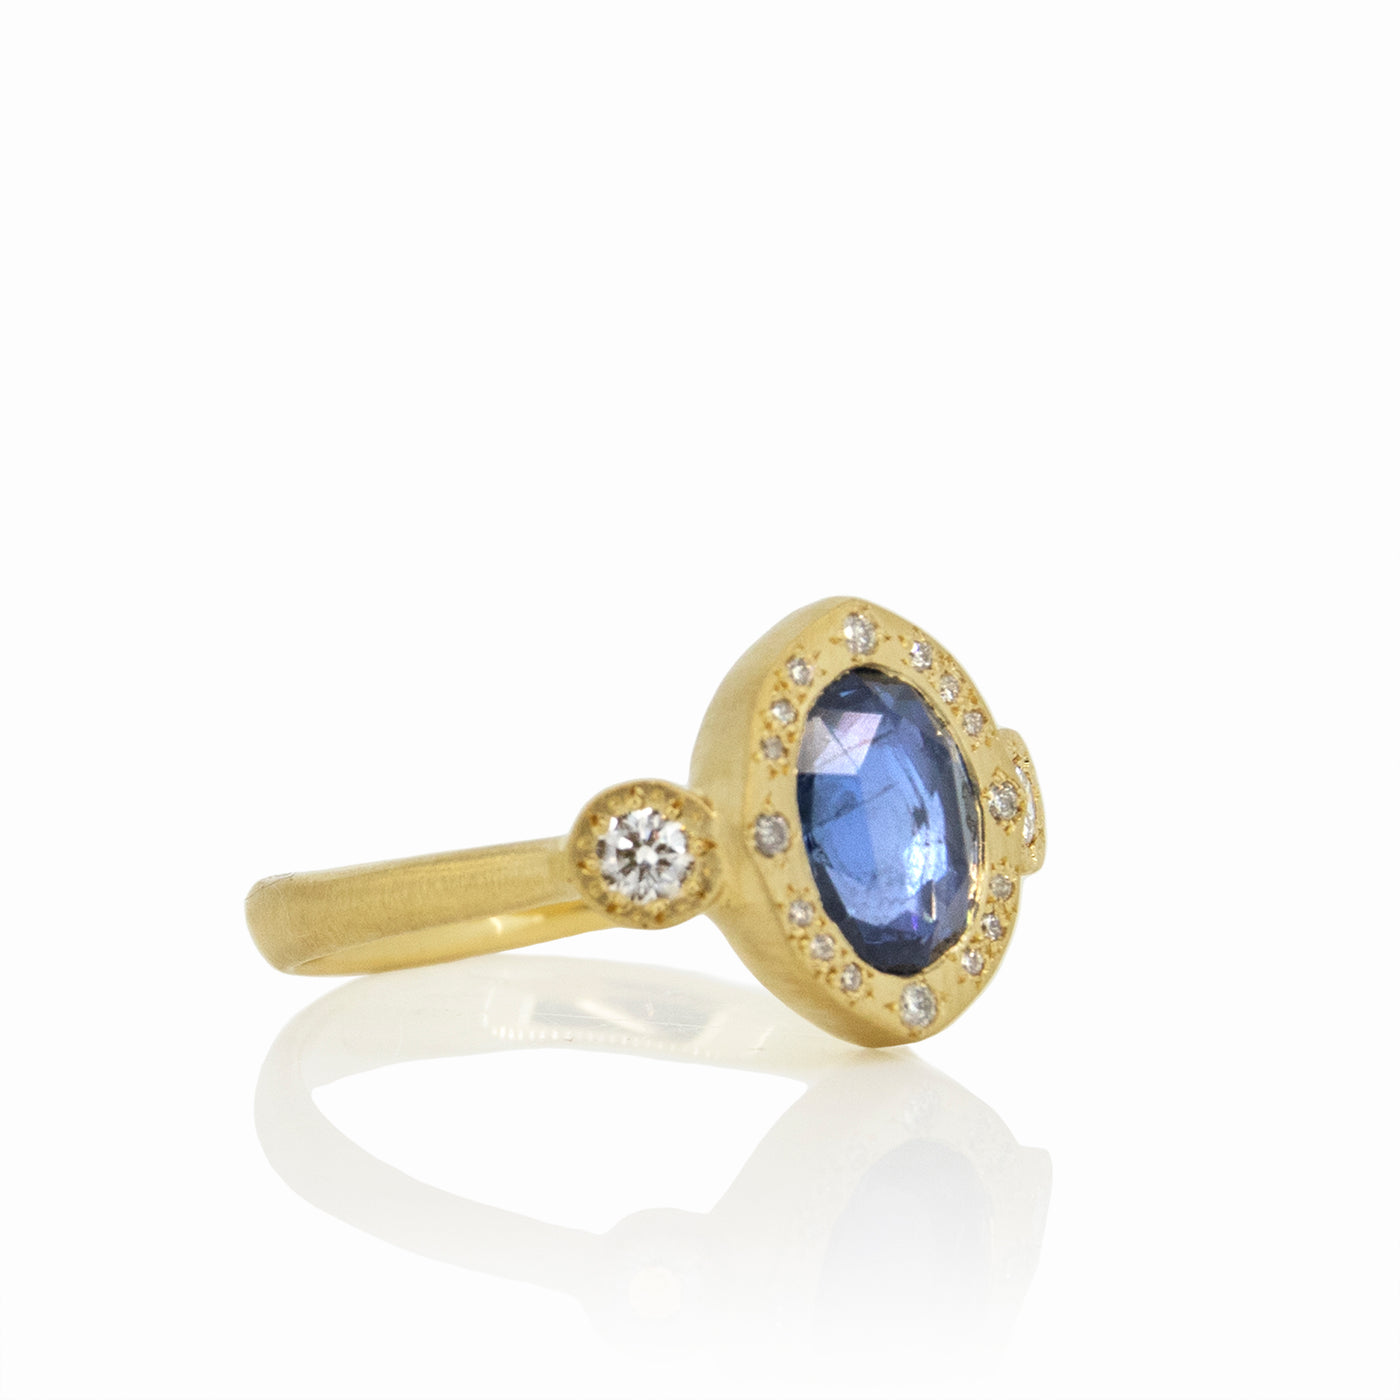 OVAL ROSECUT SAPPHIRE RING